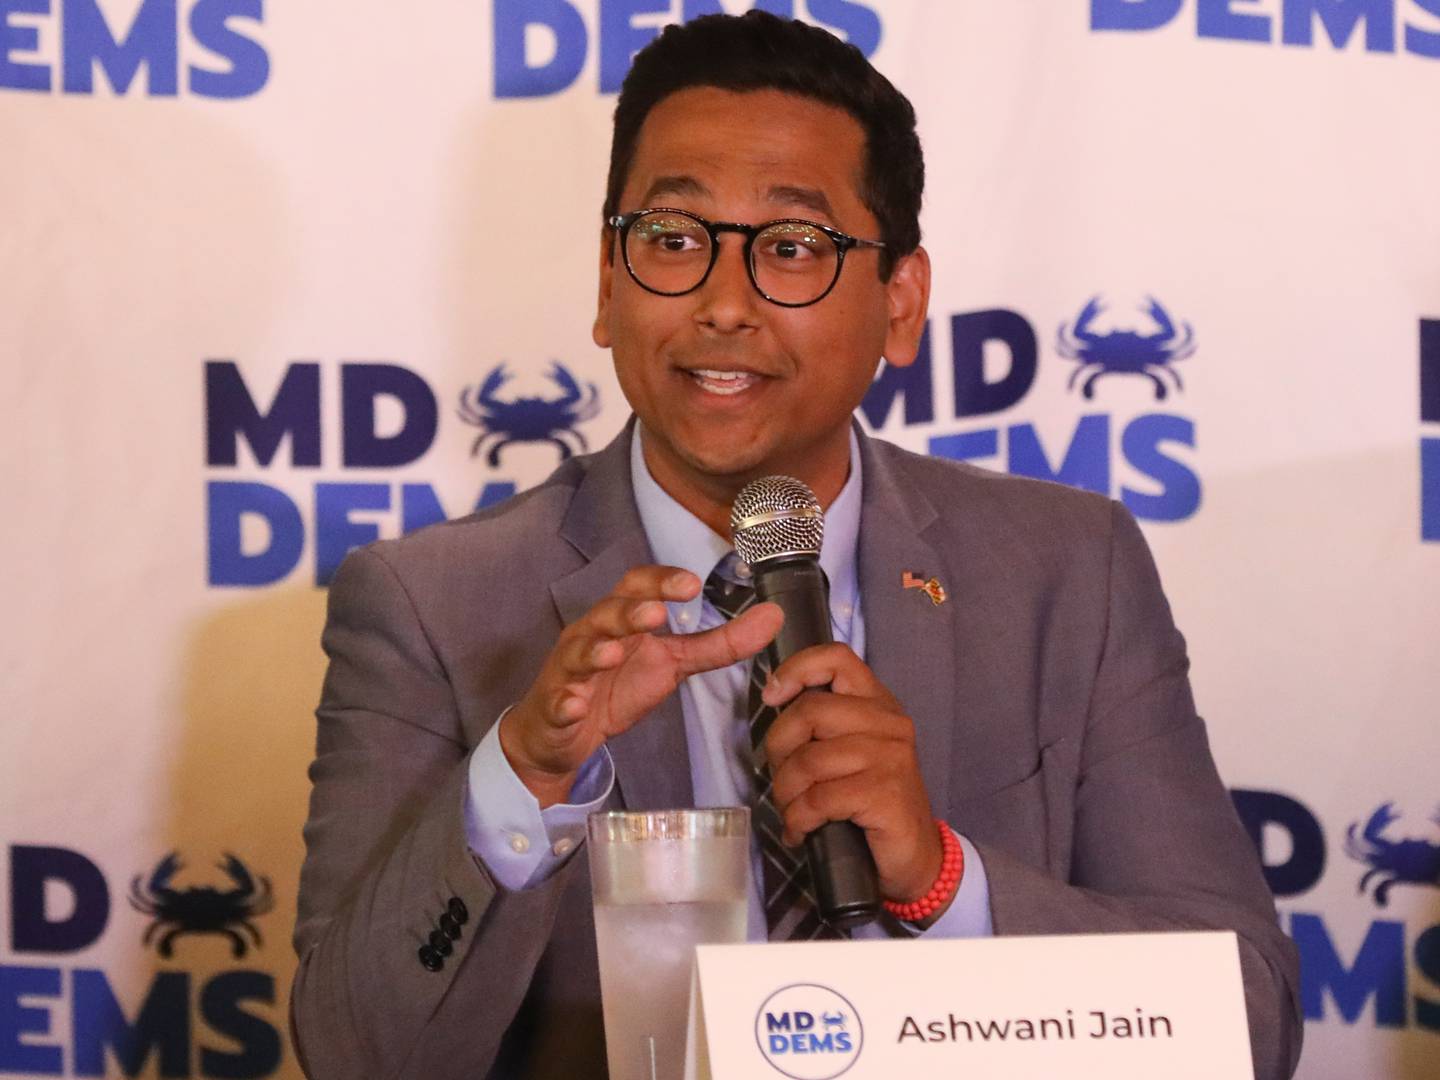 Gubernatorial candidate Ashwani Jain speaks during a candidates forum on healthcare issues sponsored by the Maryland Democratic Party at BC Brewery on May 31, 2022. (Kaitlin Newman for The Baltimore Banner)